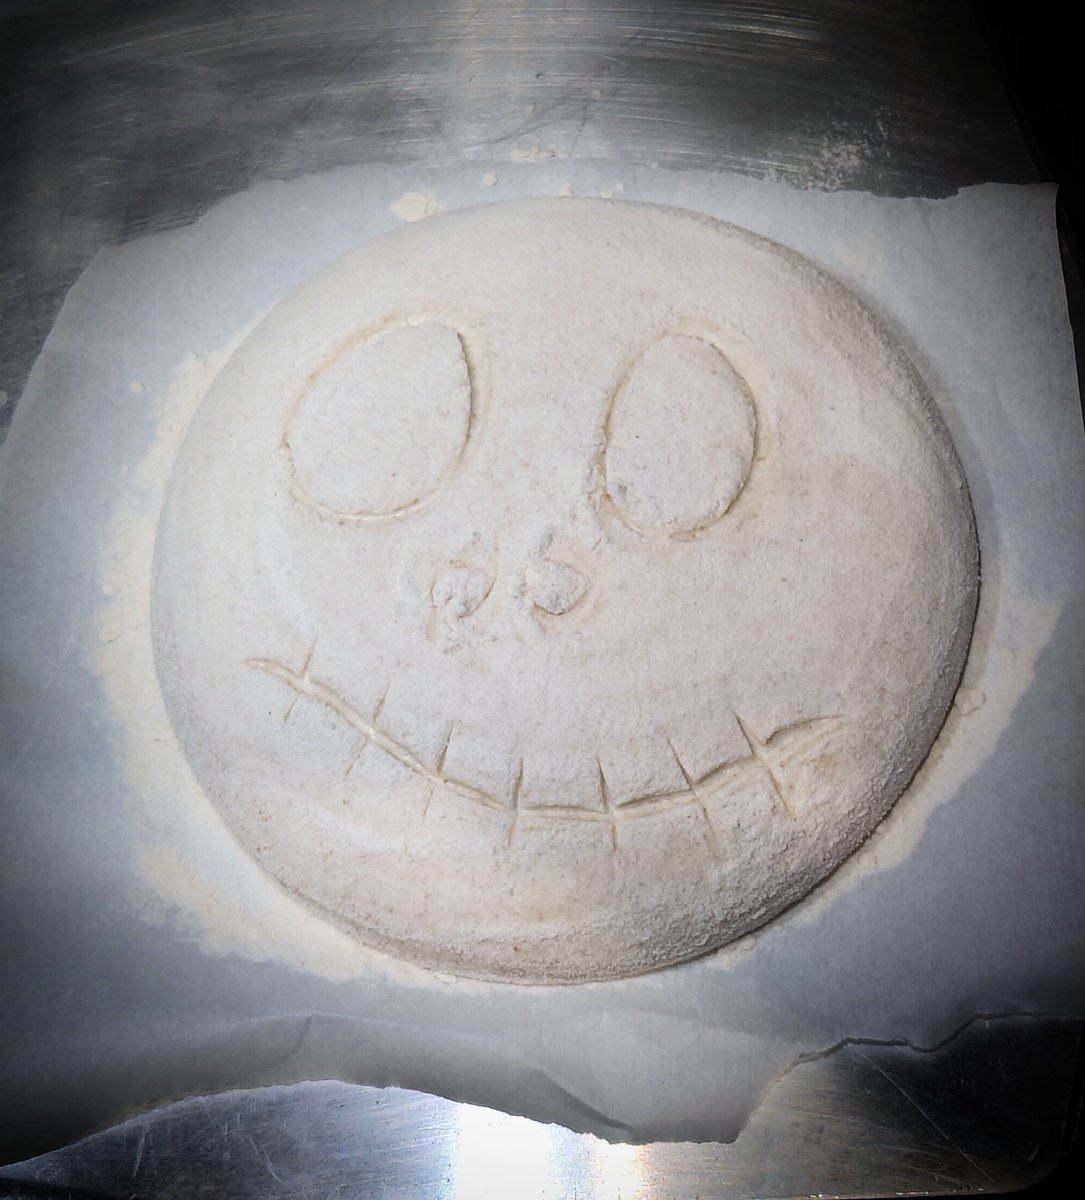 Let's see how this Halloween face comes out. Got to love a bit of Tim Burton for inspiration. 🎃
#ShareYourLoaves #artisanbaker #artisanbread #bakeyourownbread #davebakesbread #bread #breadbaker #breadmaking #realbread #RealBreadCampaign #sourdough #Halloween